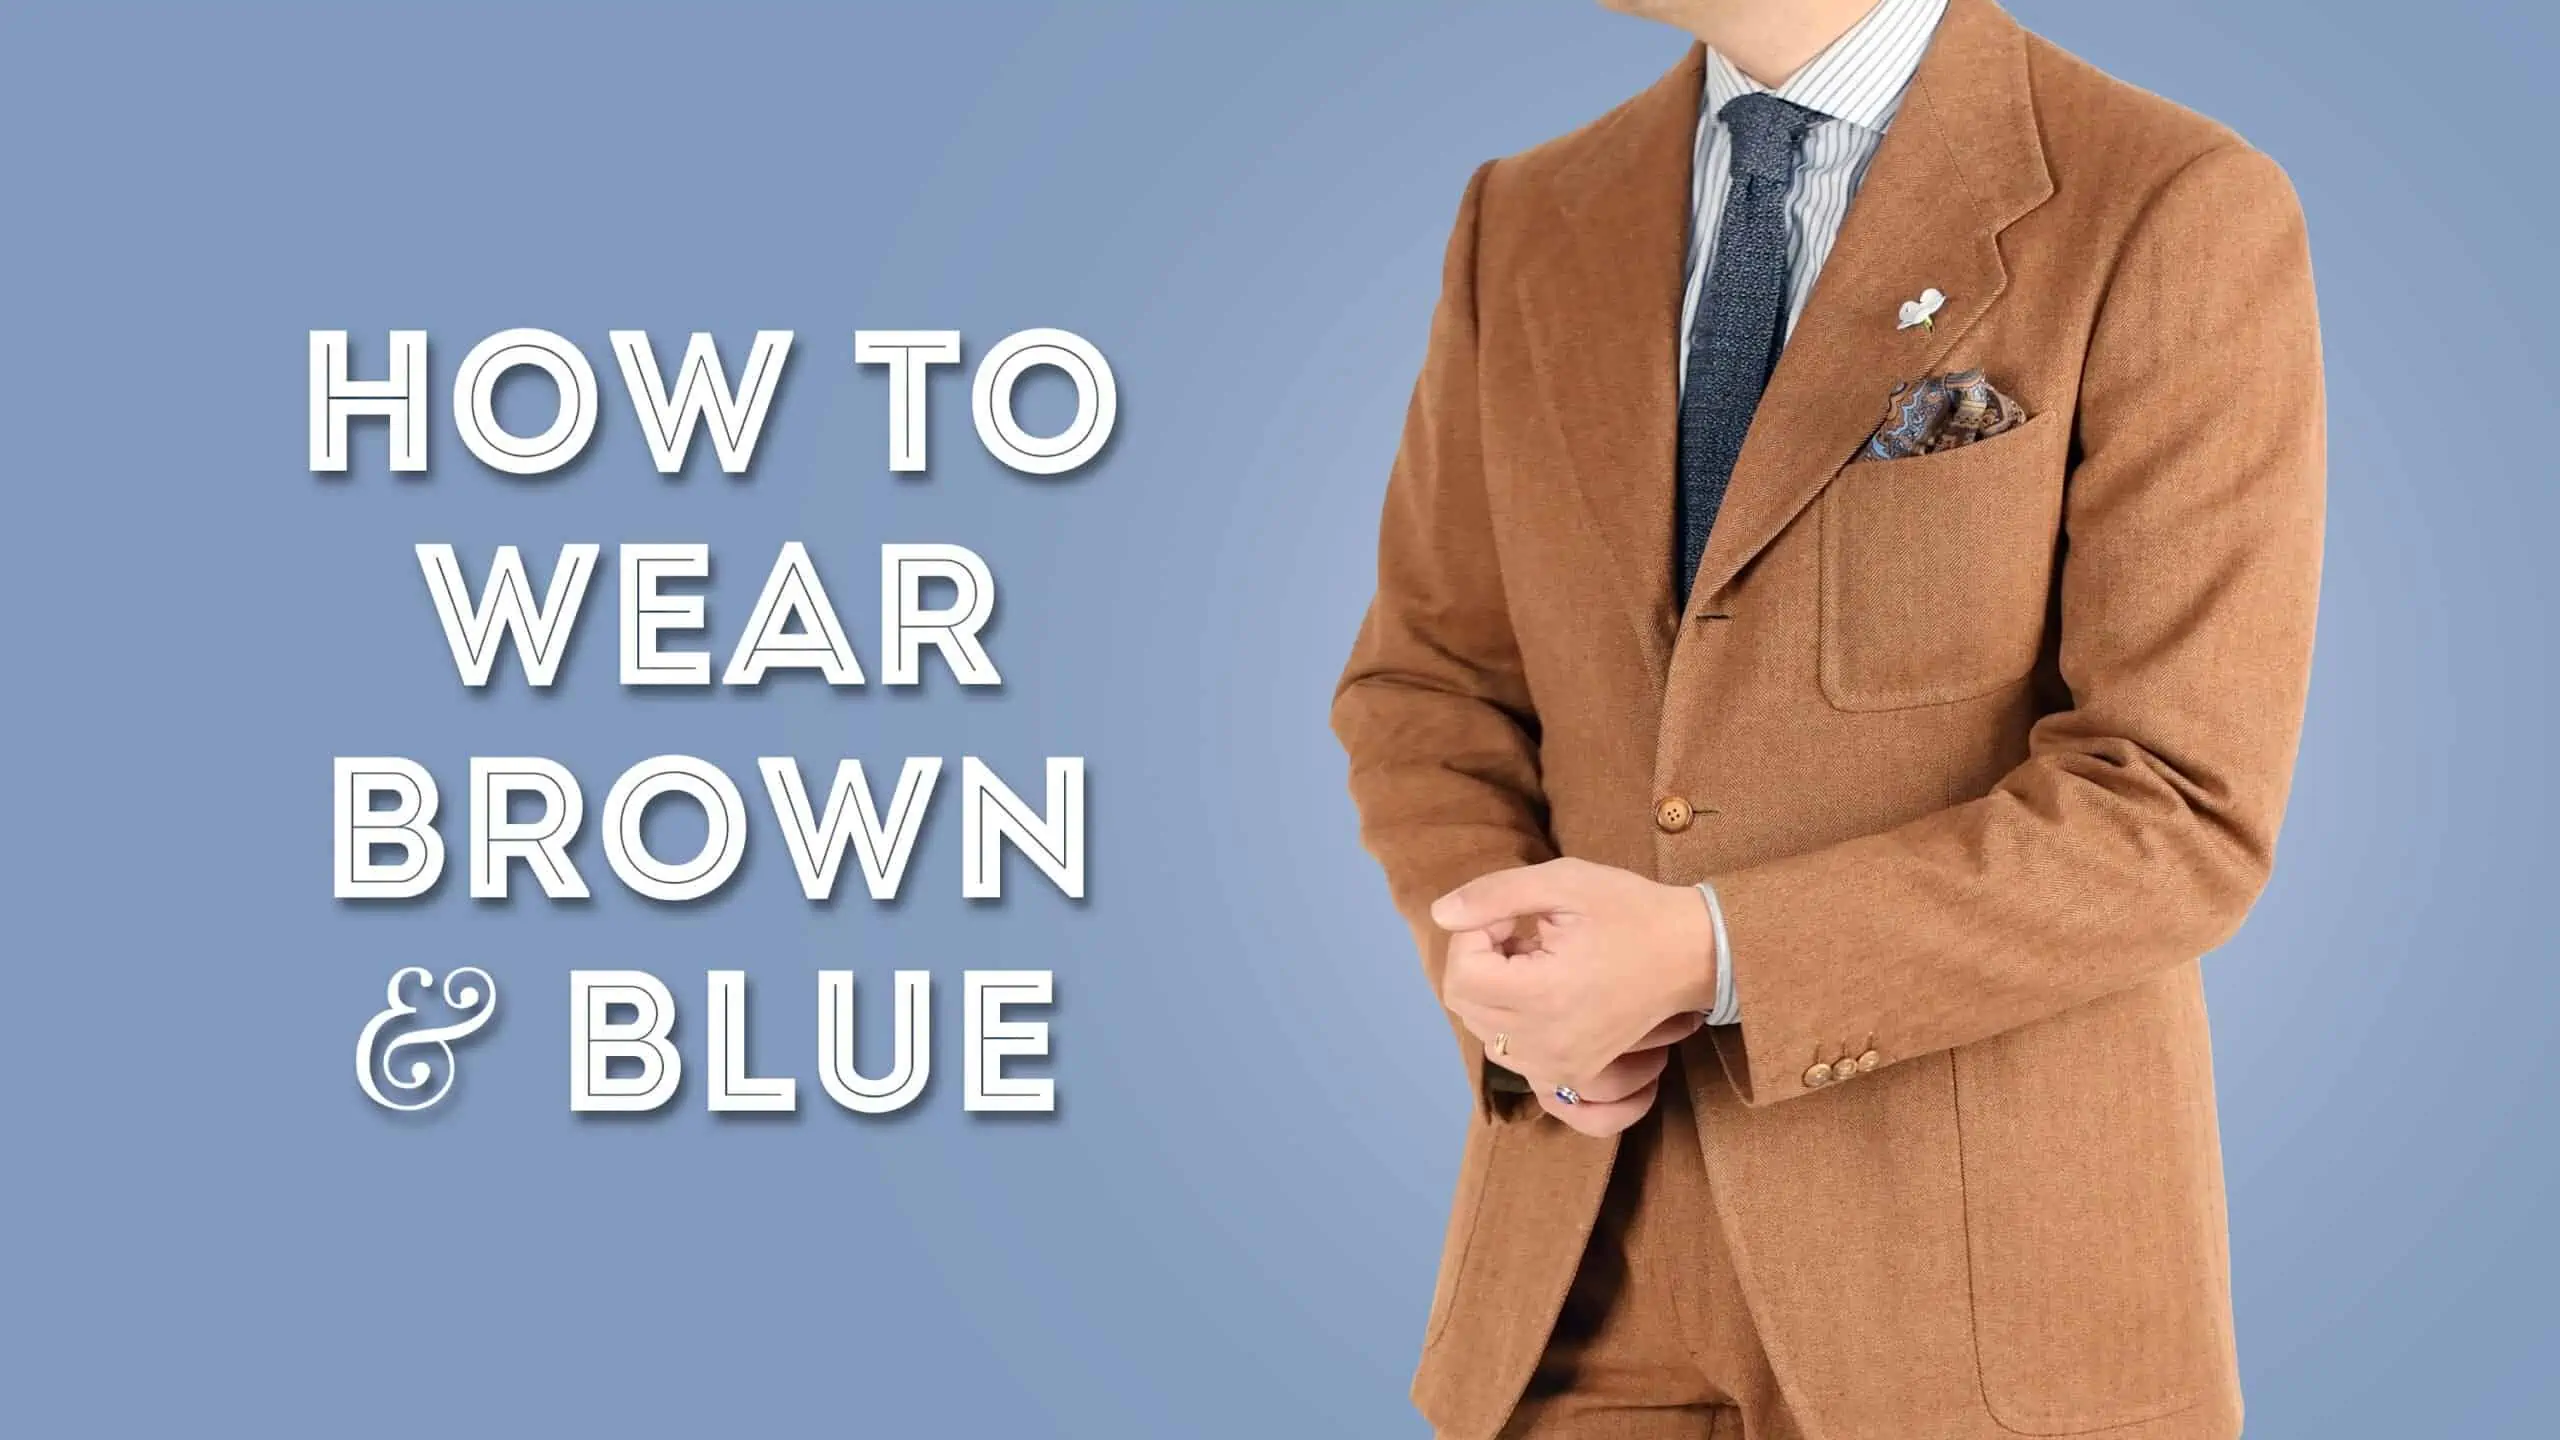 How to Wear Brown and Blue scaled